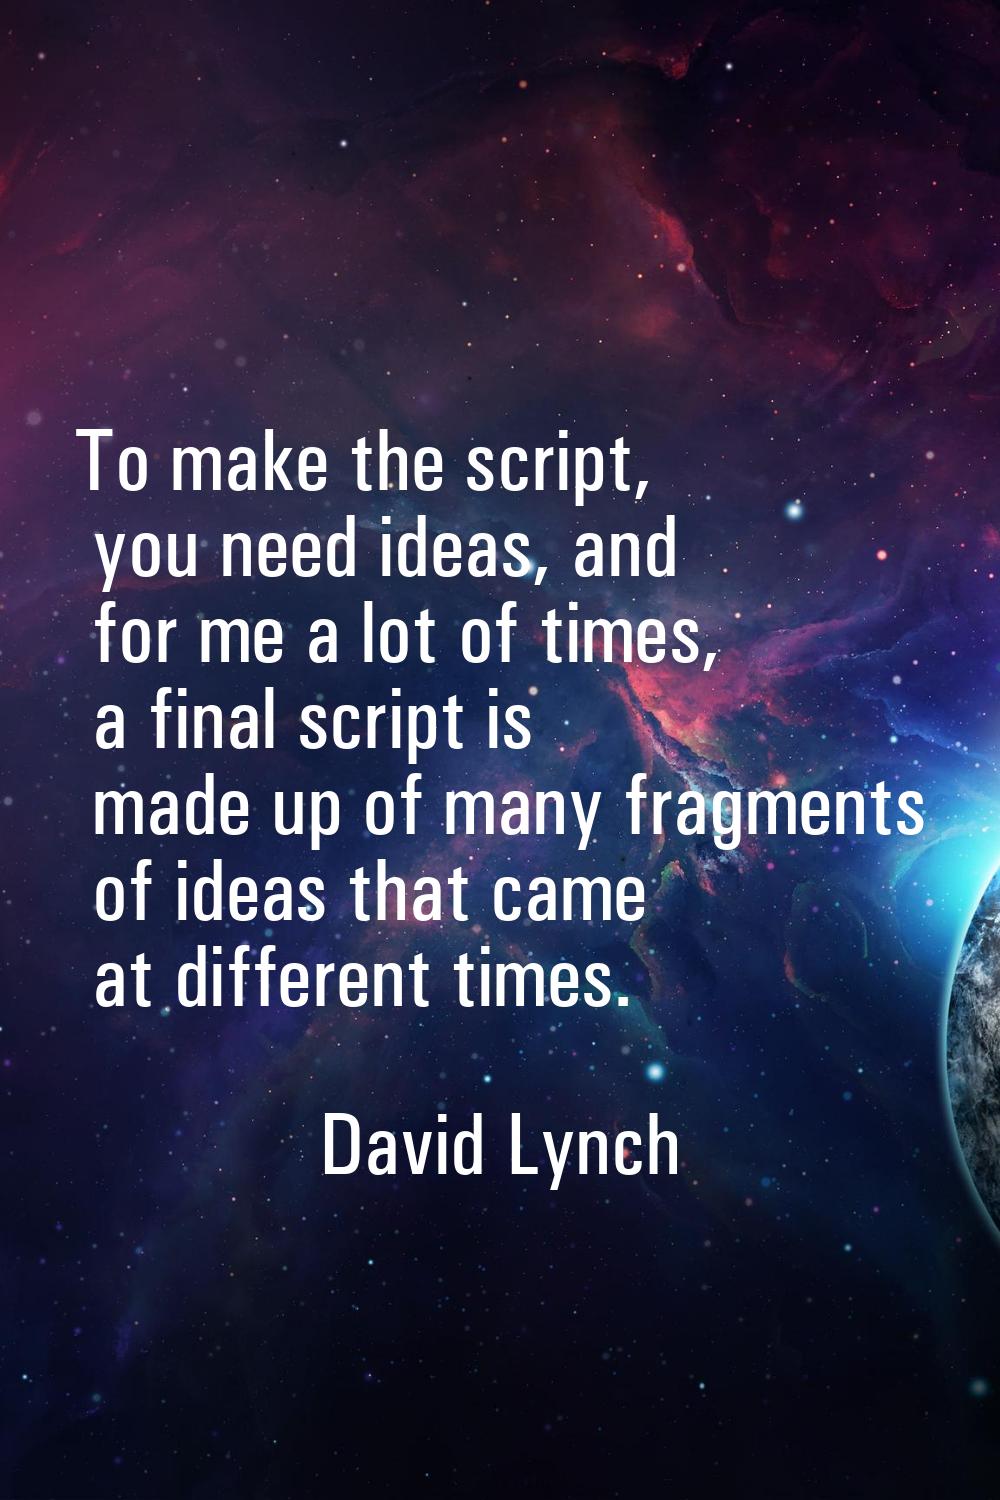 To make the script, you need ideas, and for me a lot of times, a final script is made up of many fr